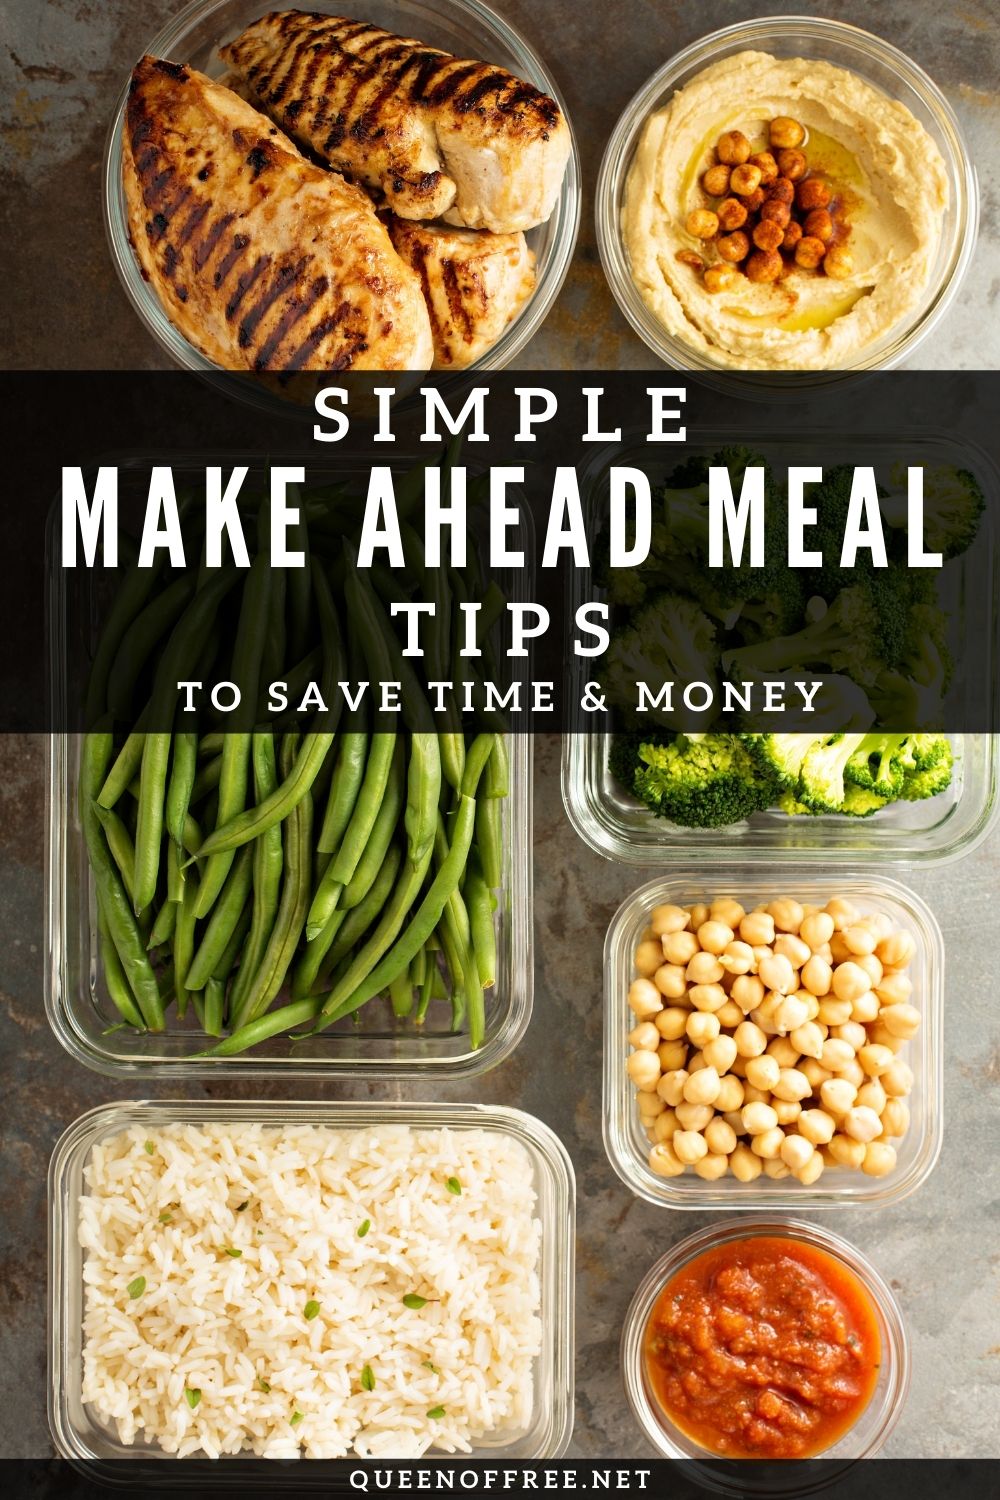 Don't give into dinnertime drama. These Simple Make Ahead Meal Ideas provide the inspiration you need to keep cooking!